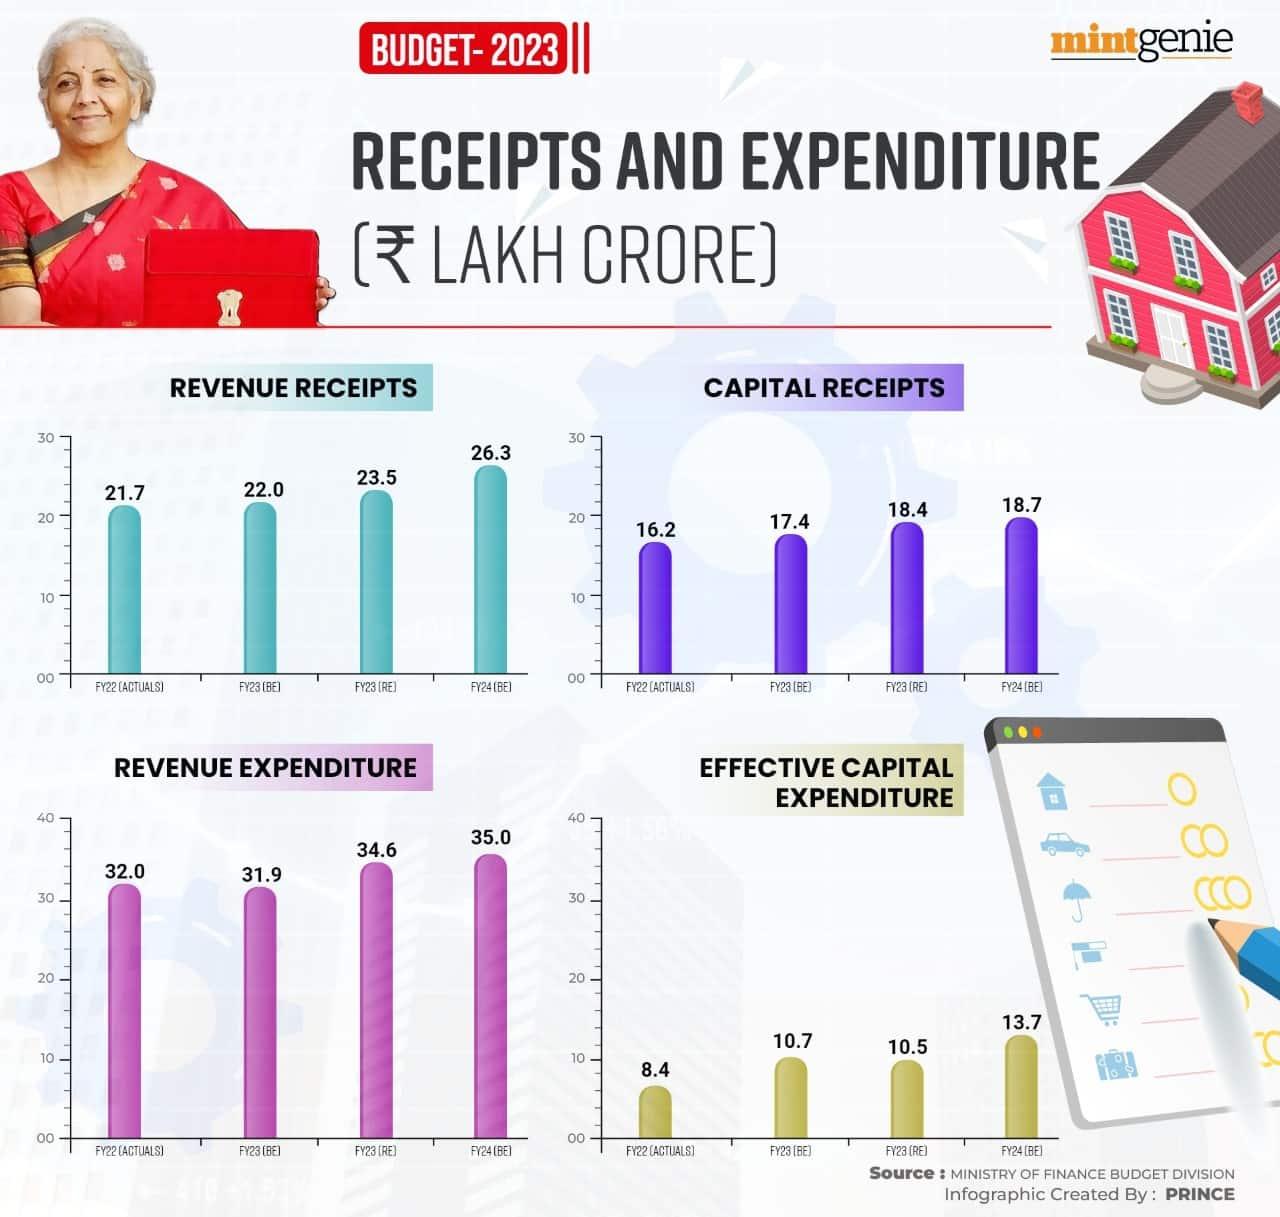 Budget 2023: Highlights for receipts and expenditure